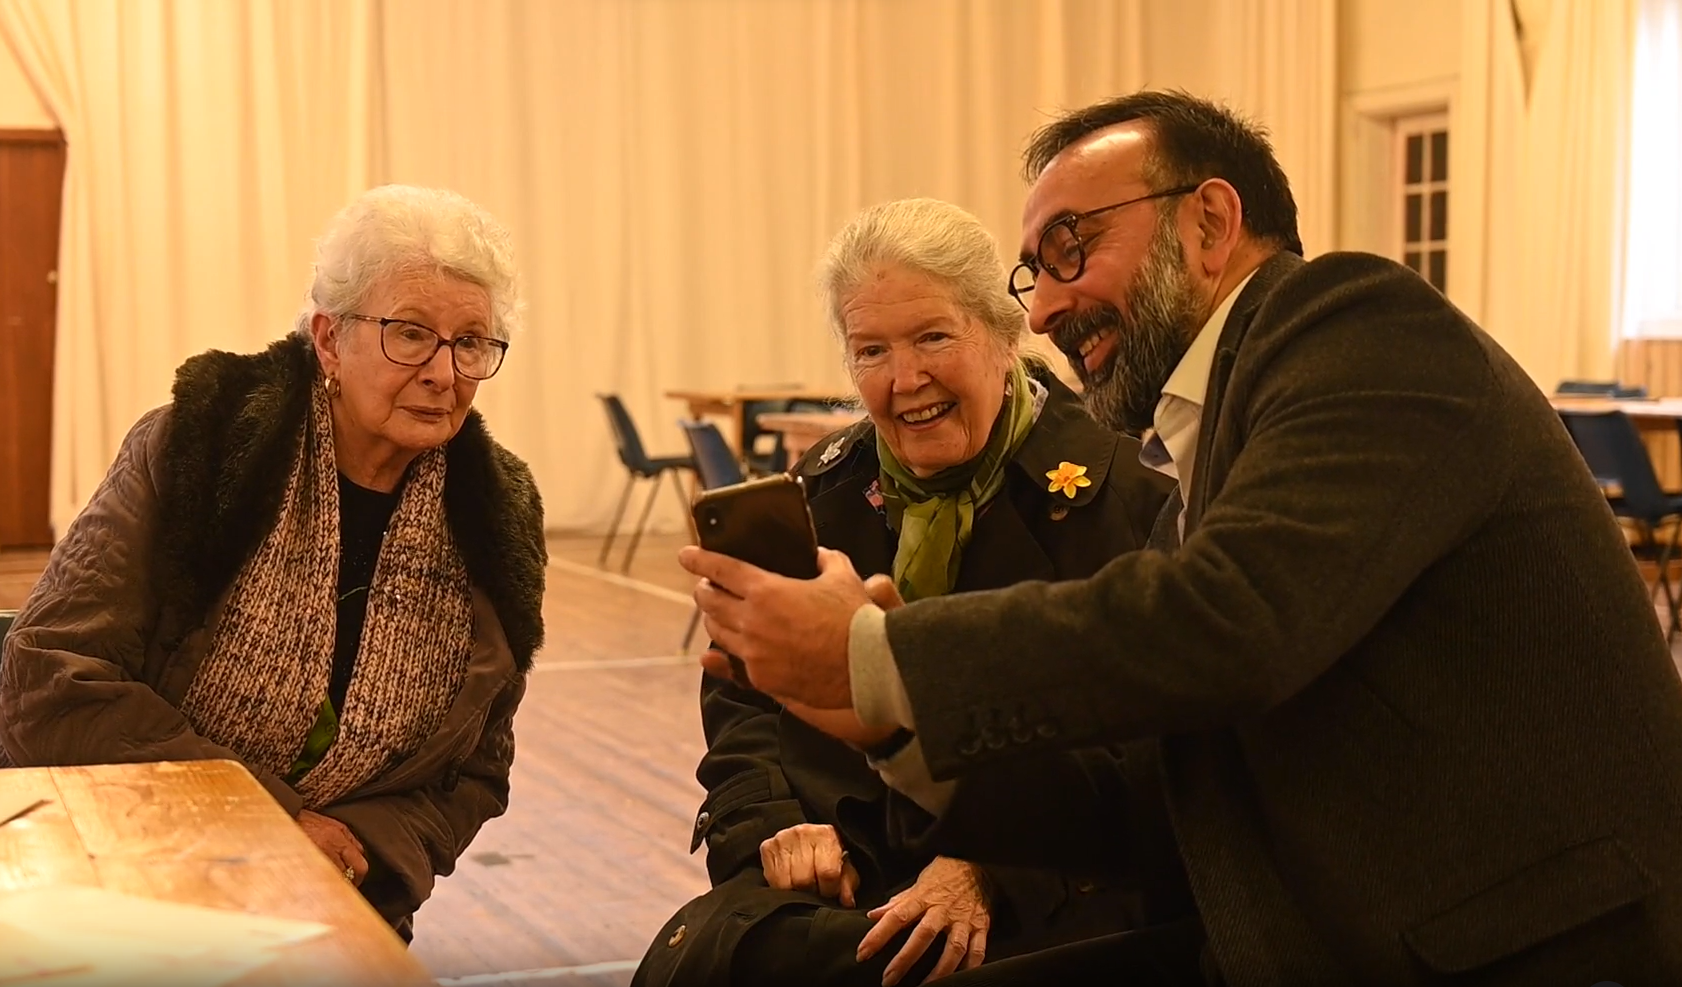 Mohammed Iltaf and older people looking at a device screen and smiling